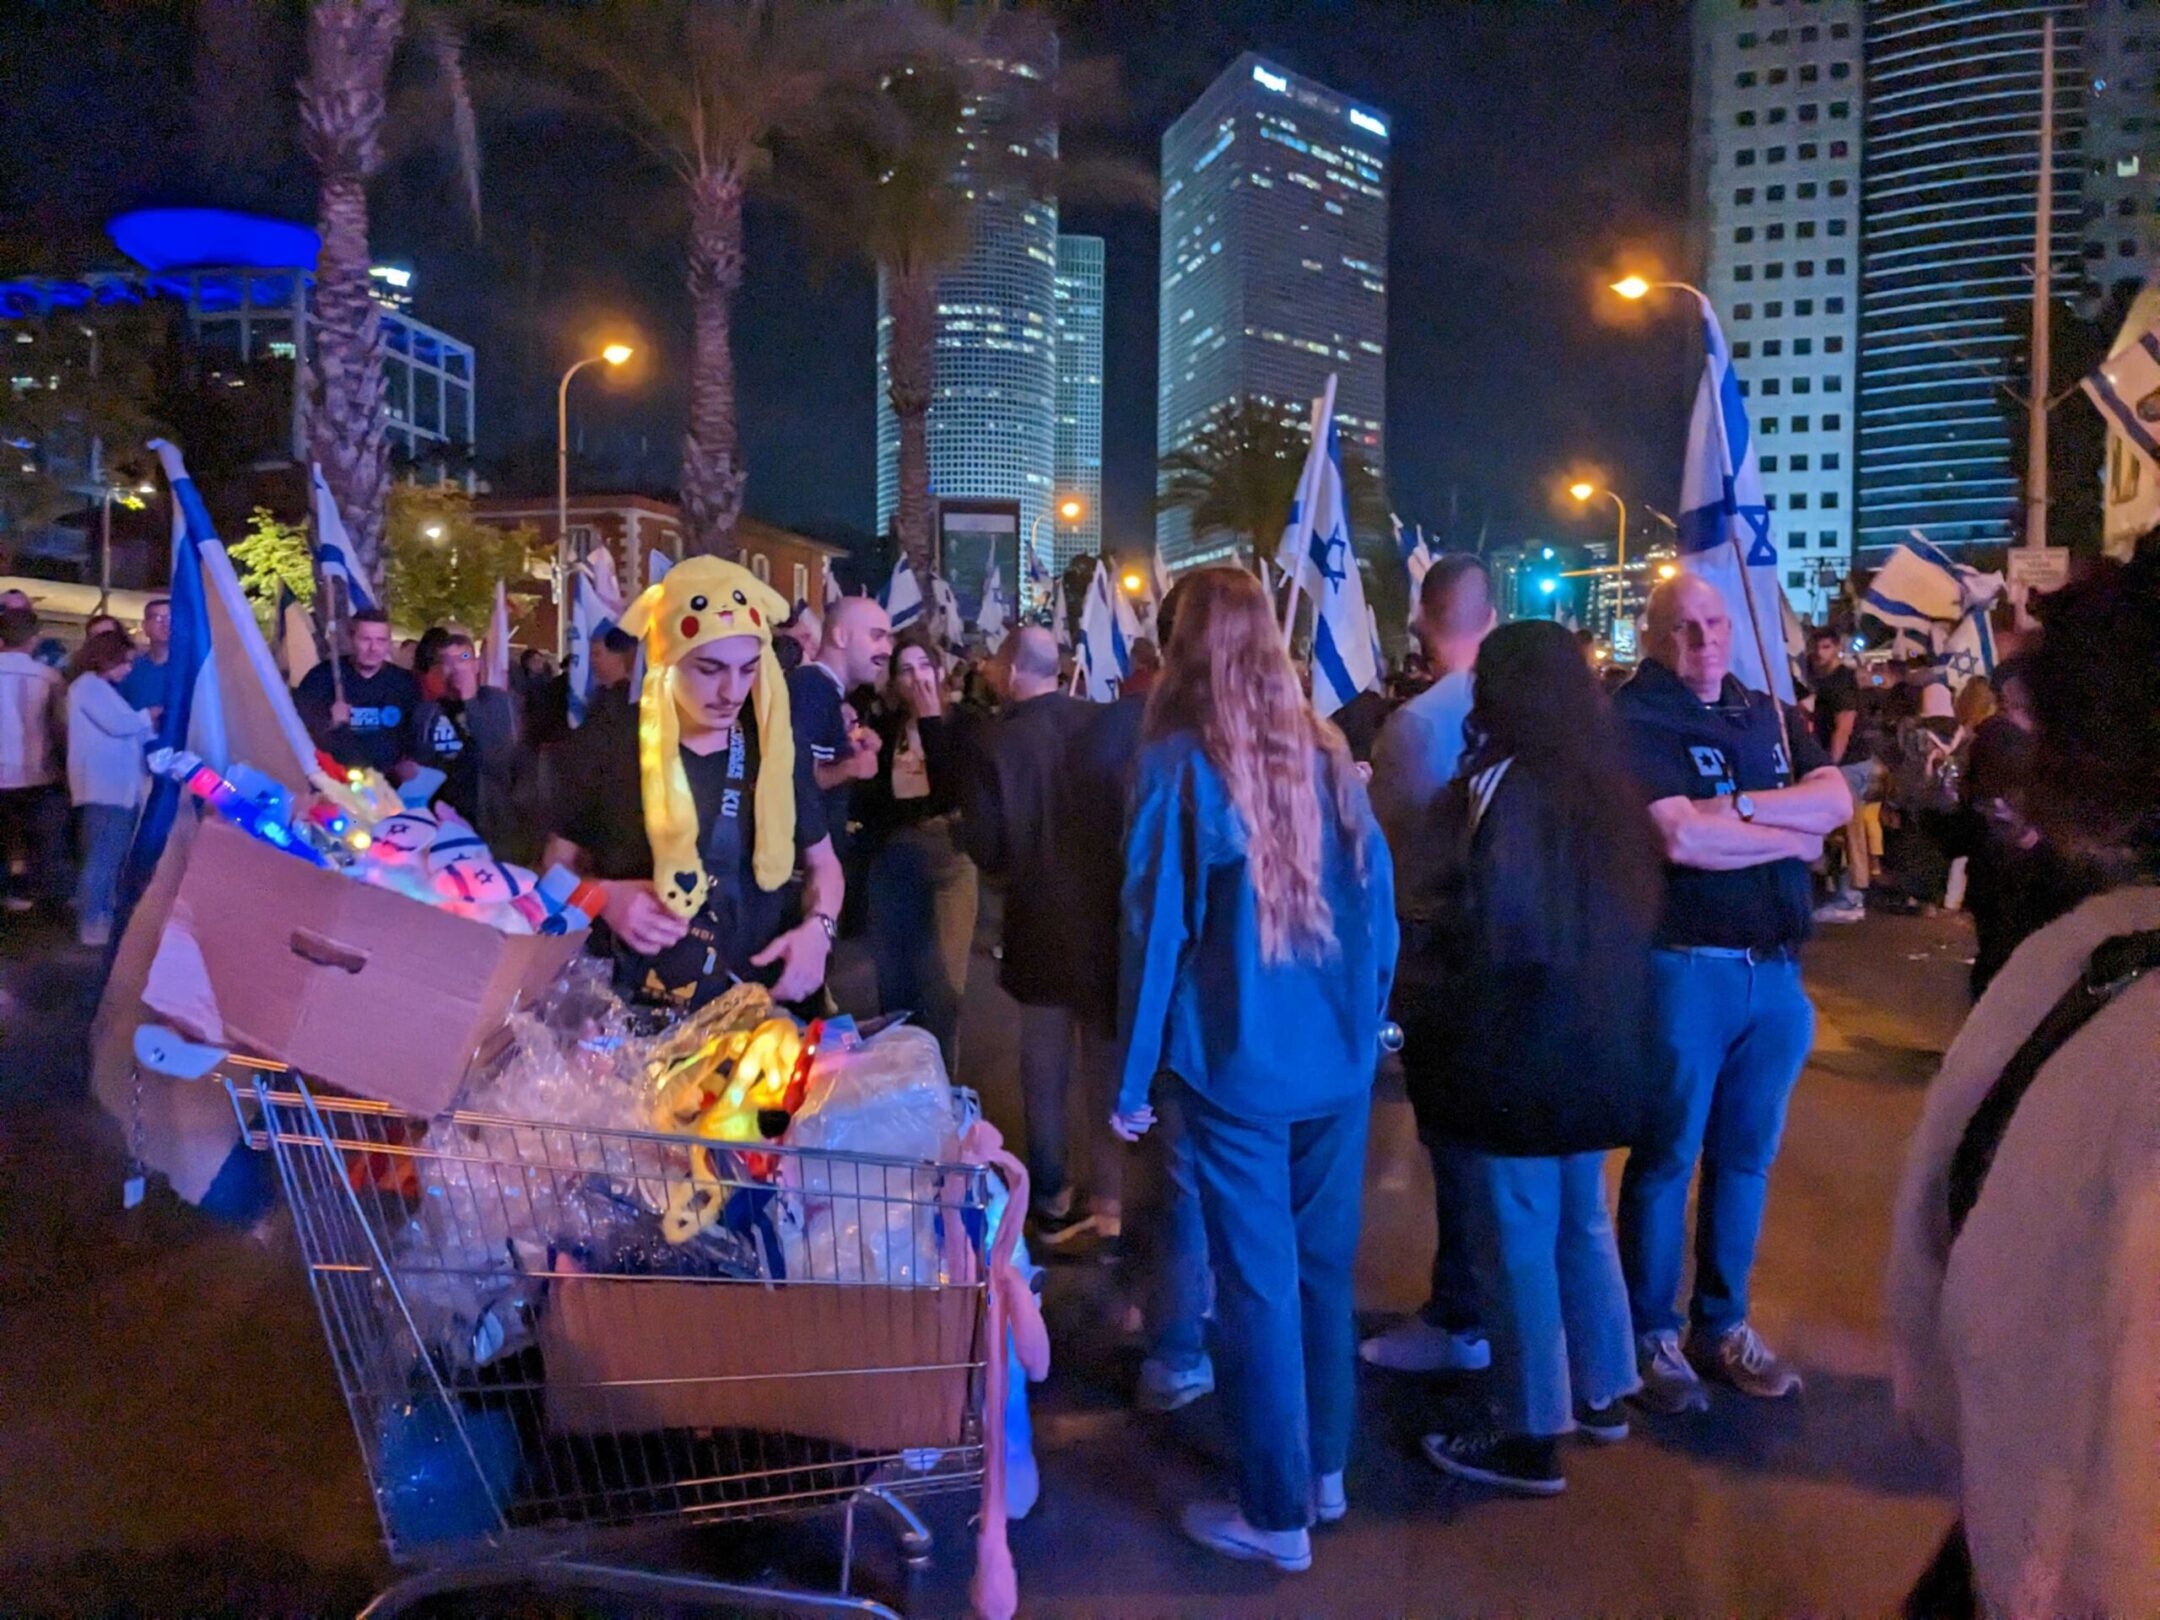 A flag vendor stands with his wares during a Yom Haatzmaut celebration and anti-government protest in Tel Aviv, April 25, 2023. (Ben Sales)